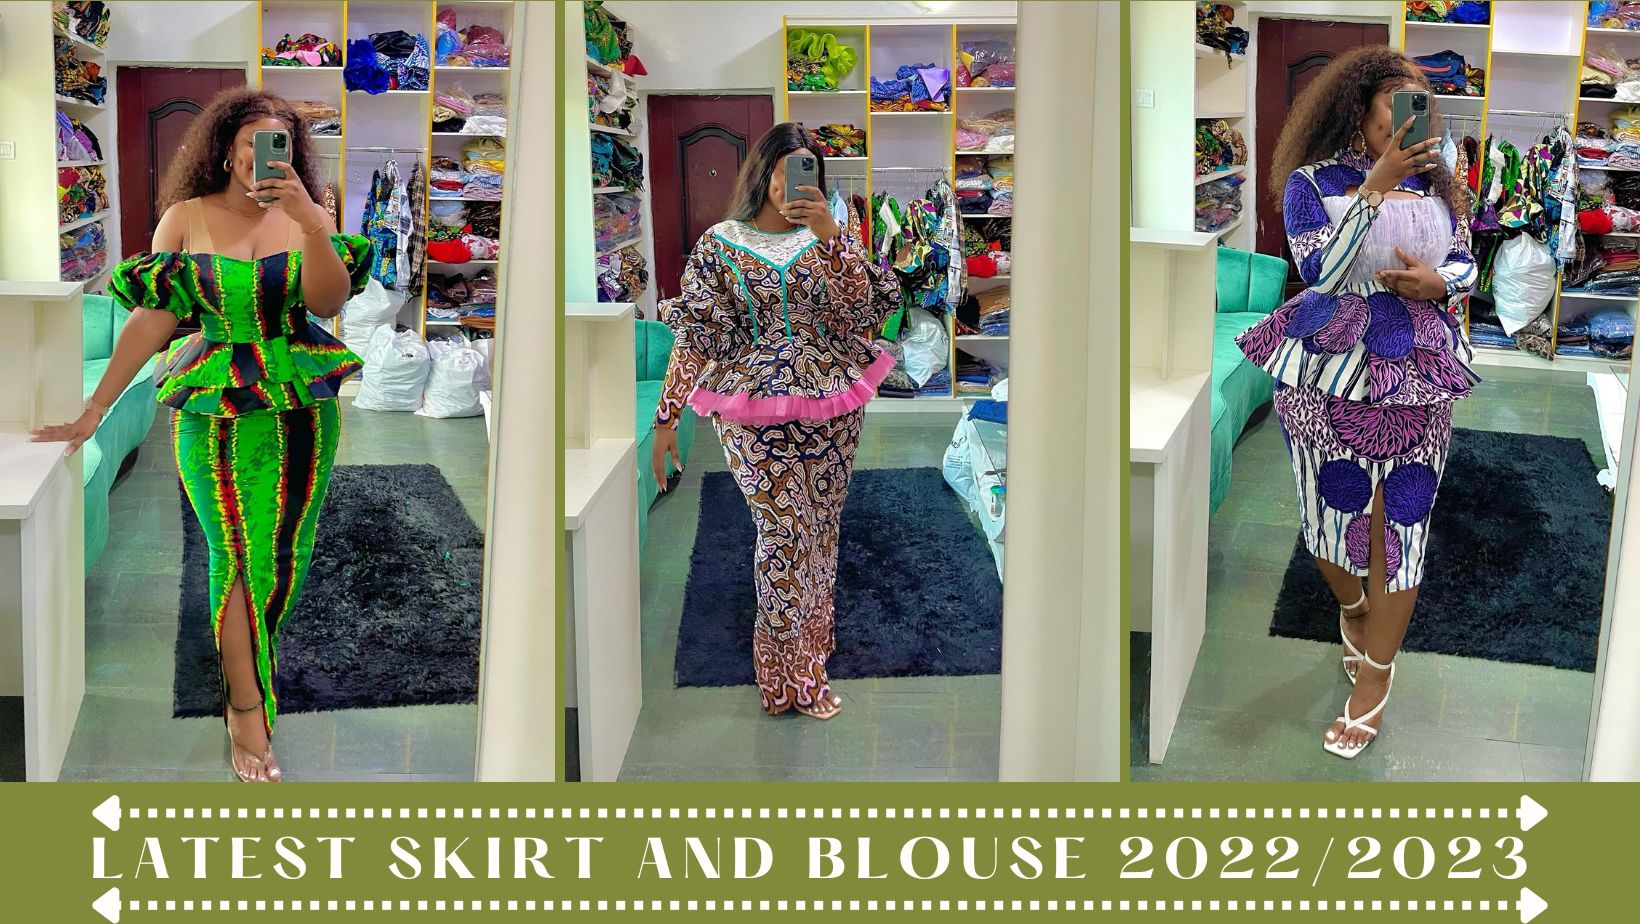 2022/2023 Latest Skirt and Blouse